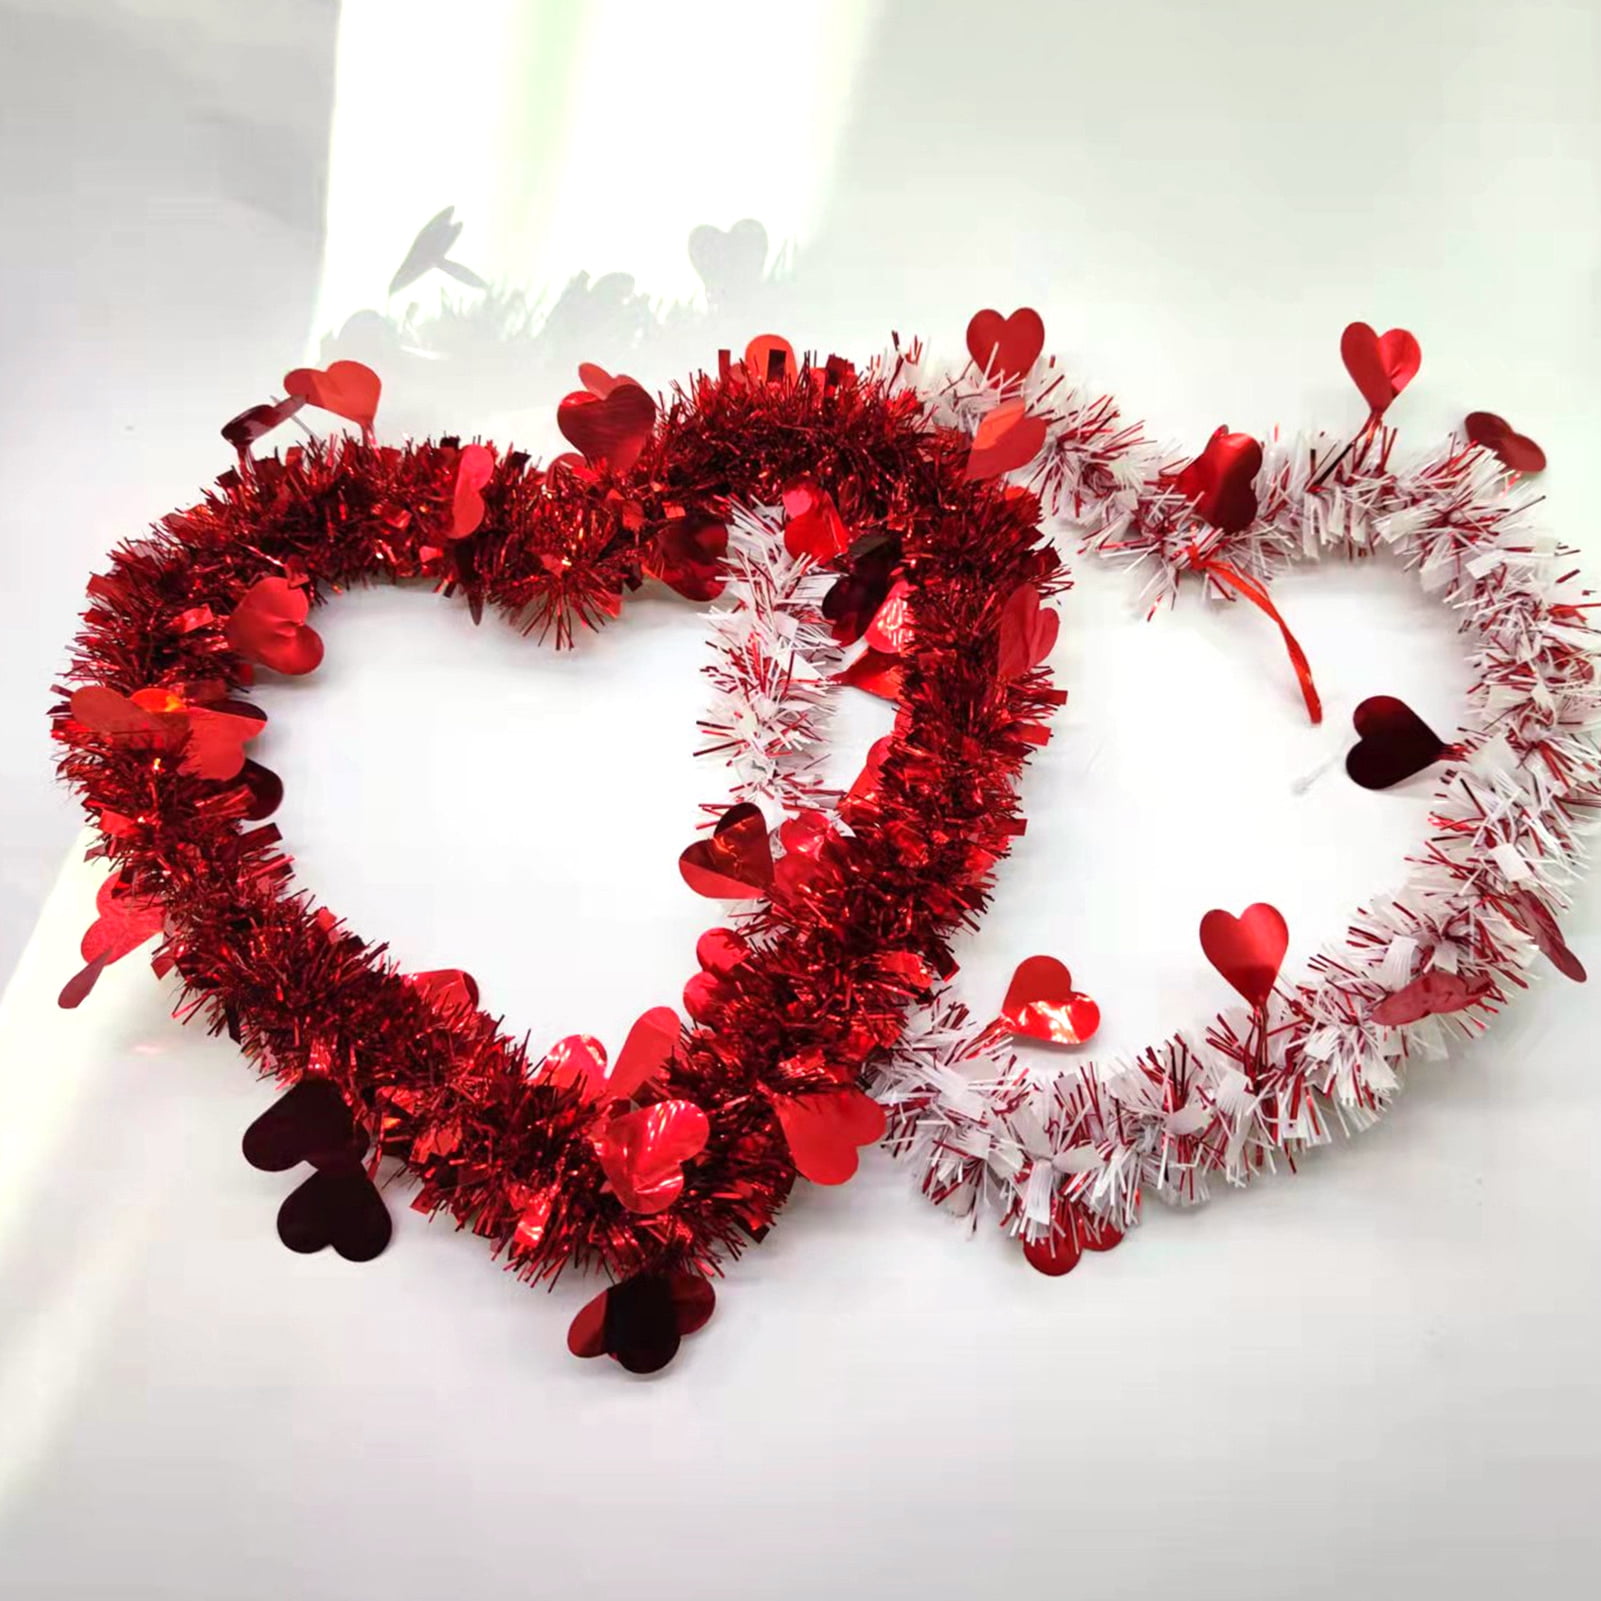 10" Hand Made Wired Red Hearts on White Bow Valentine Day Love Anniversary 